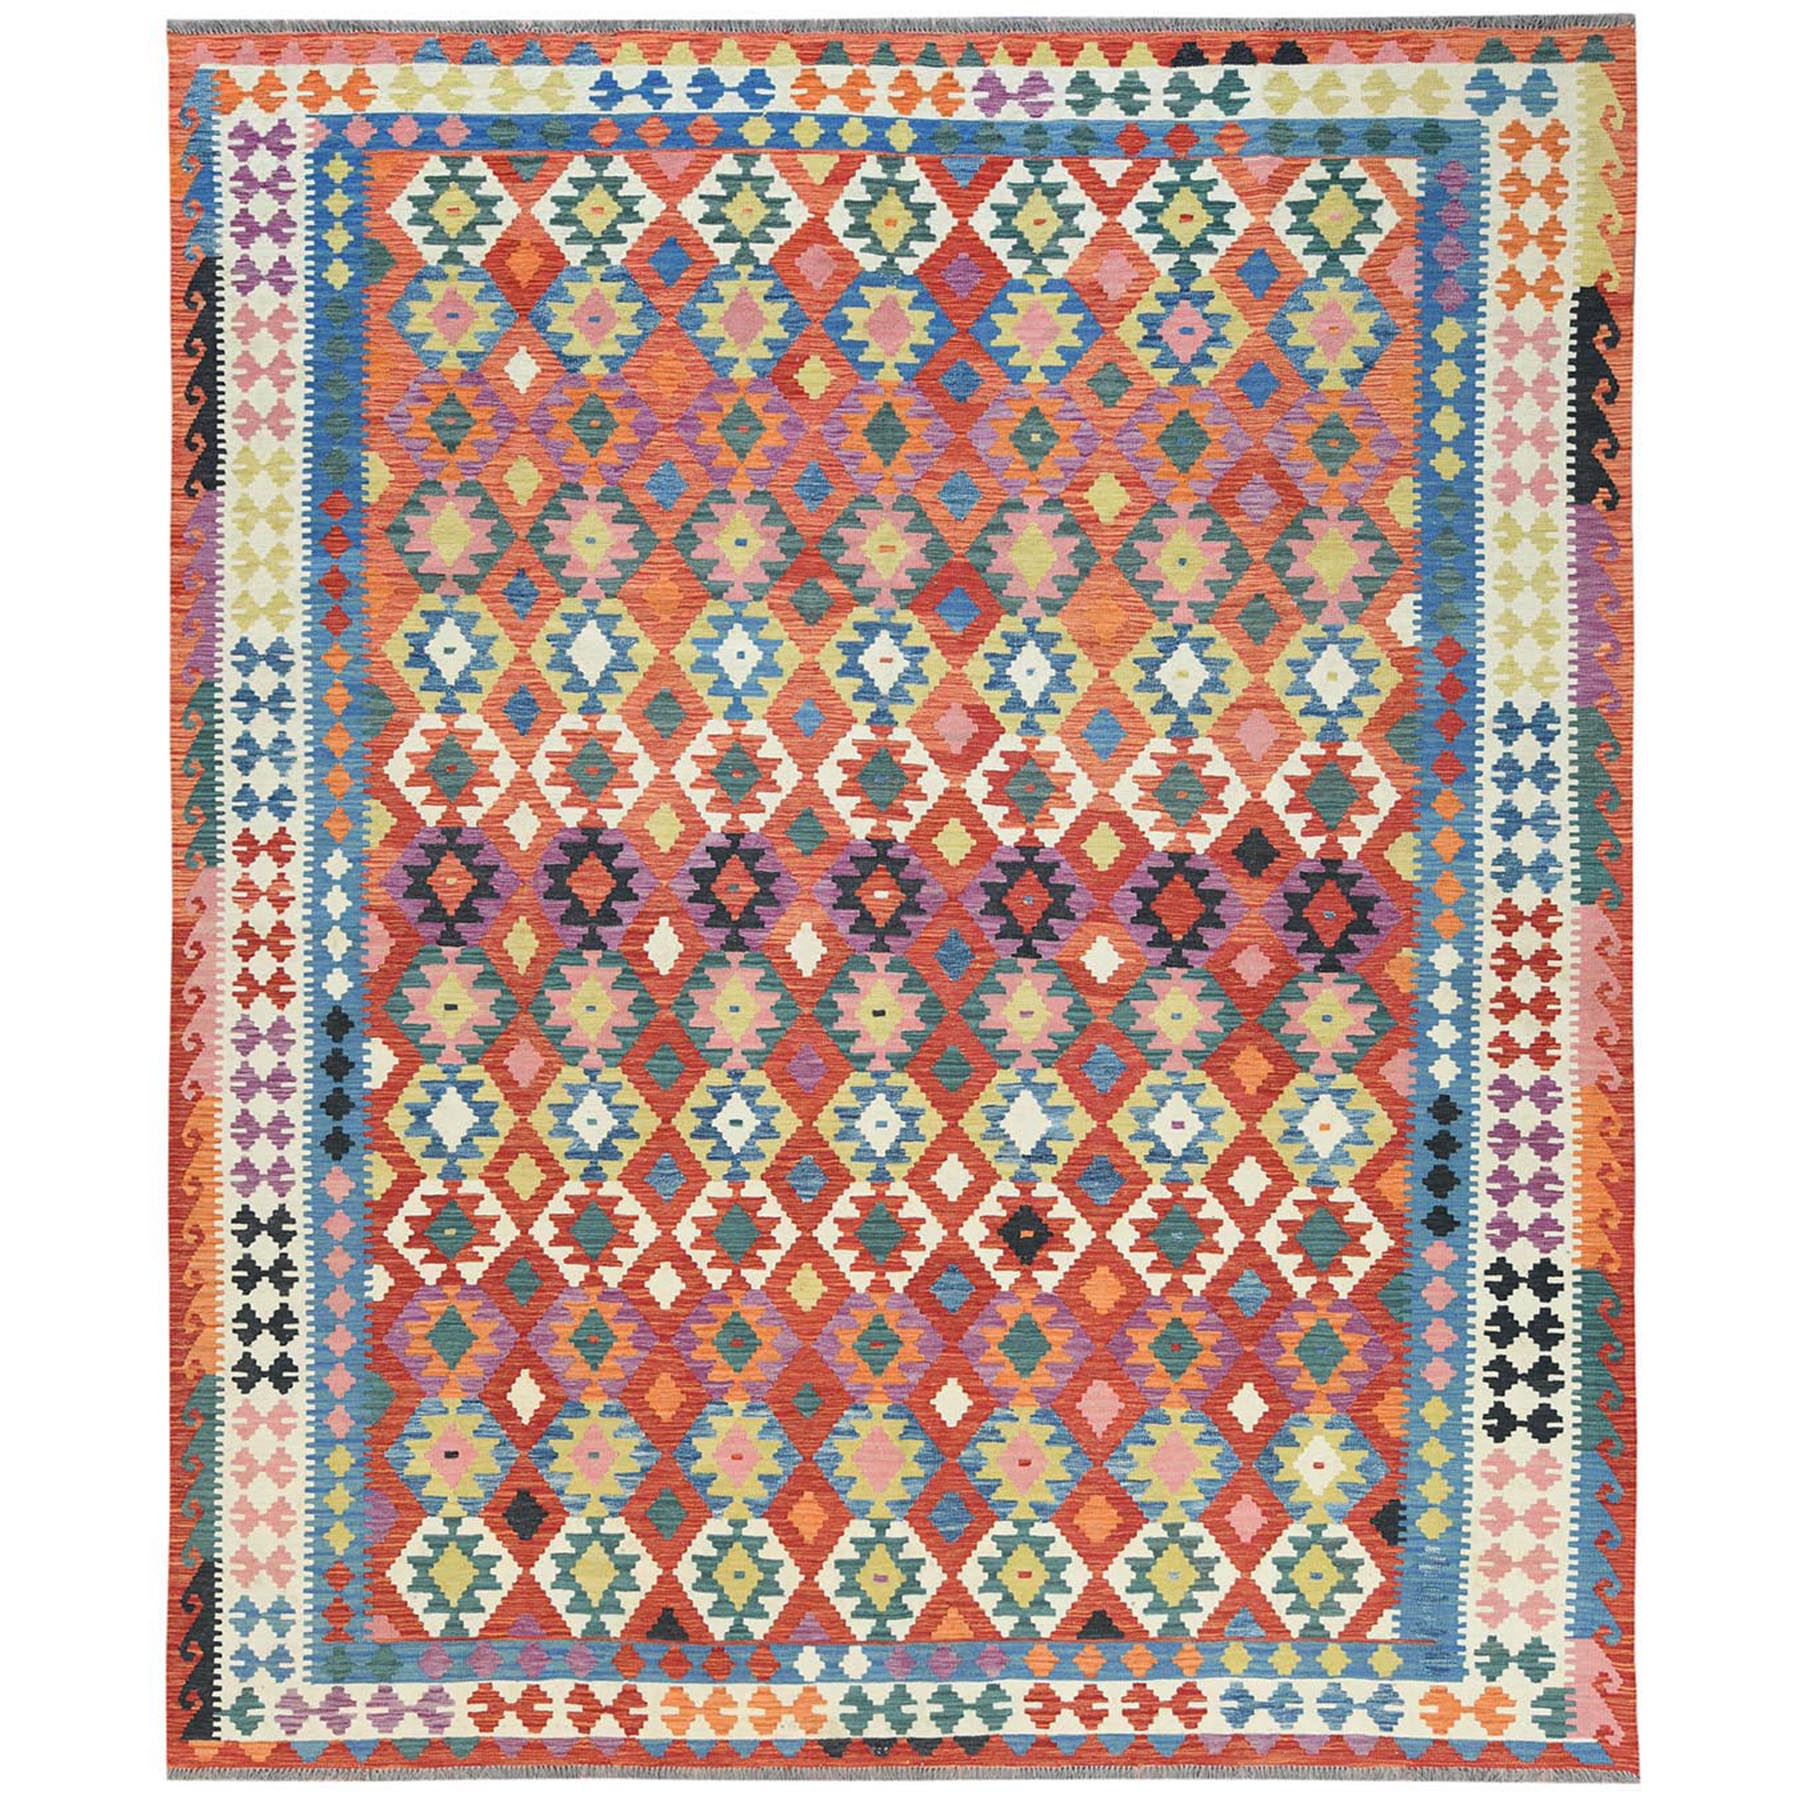 10'4"x12'7" Colorful, Pure Wool Hand Woven, Afghan Kilim with Geometric Design Flat Weave Veggie Dyes, Reversible Oriental Rug 